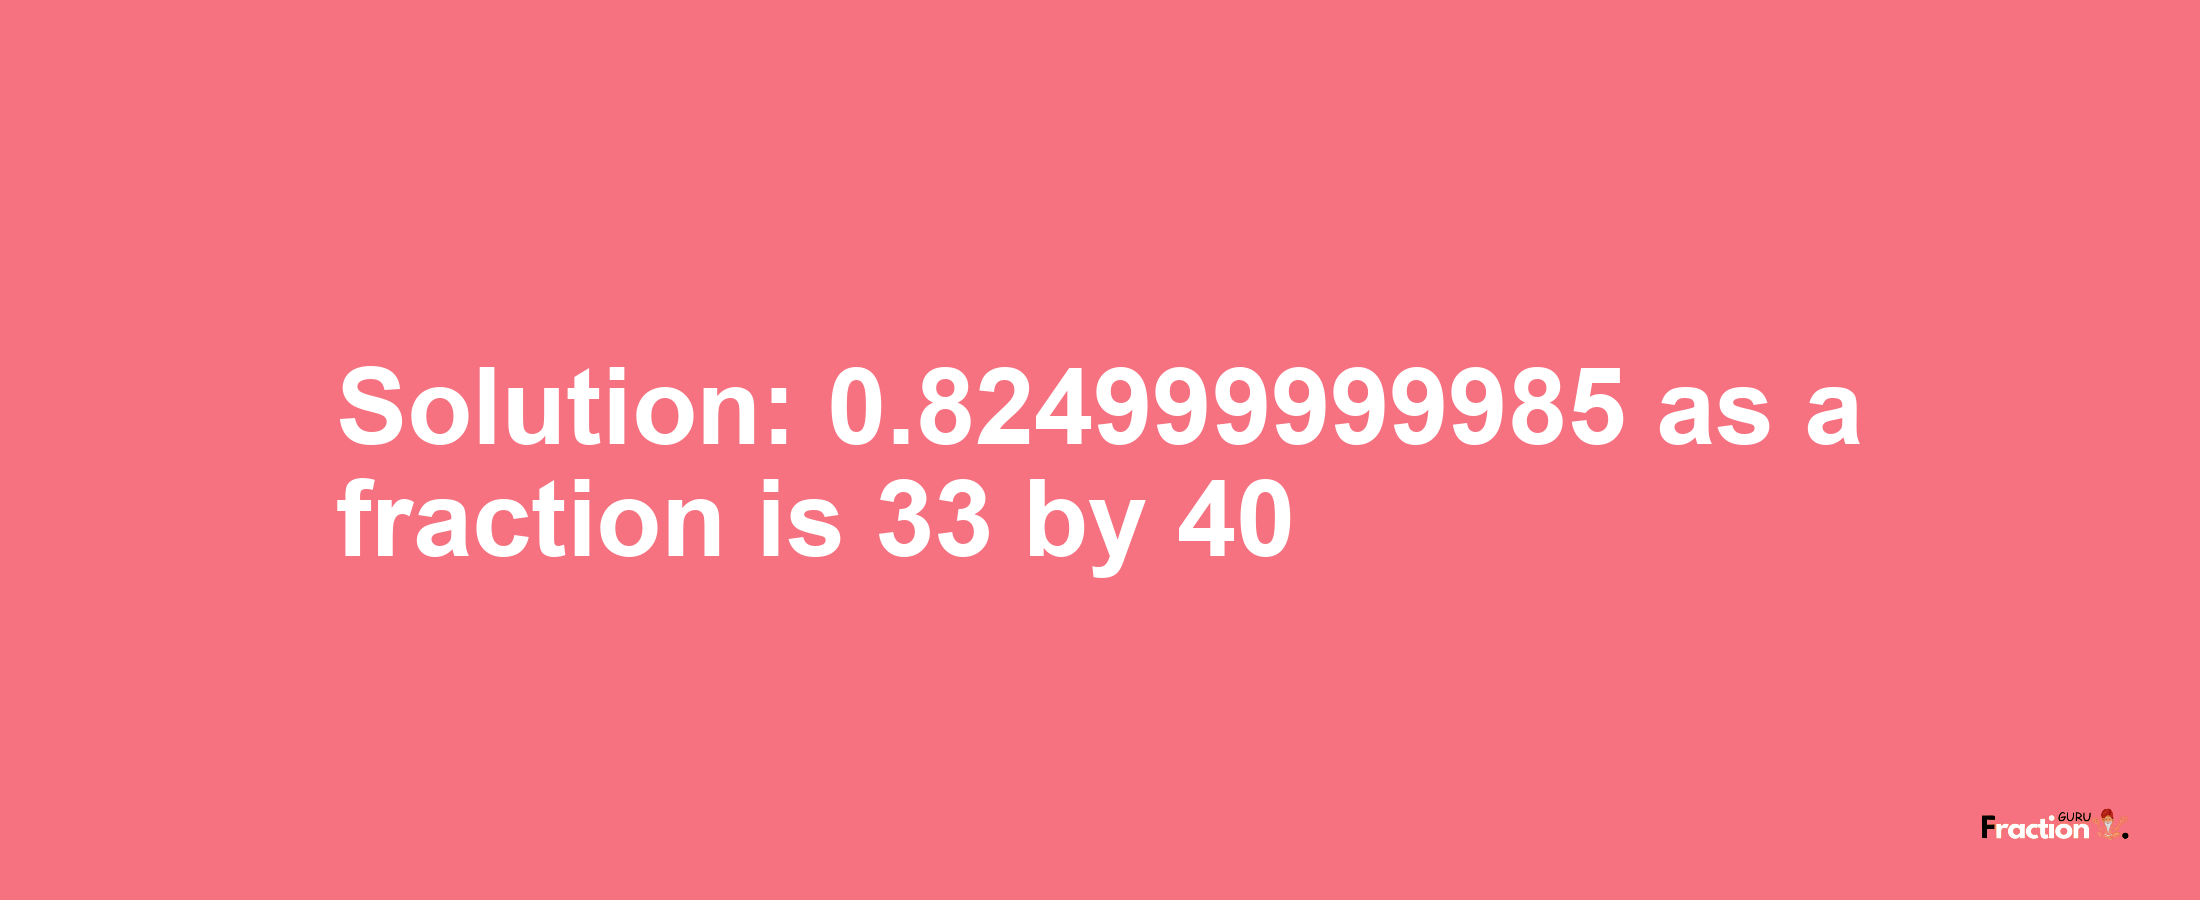 Solution:0.824999999985 as a fraction is 33/40